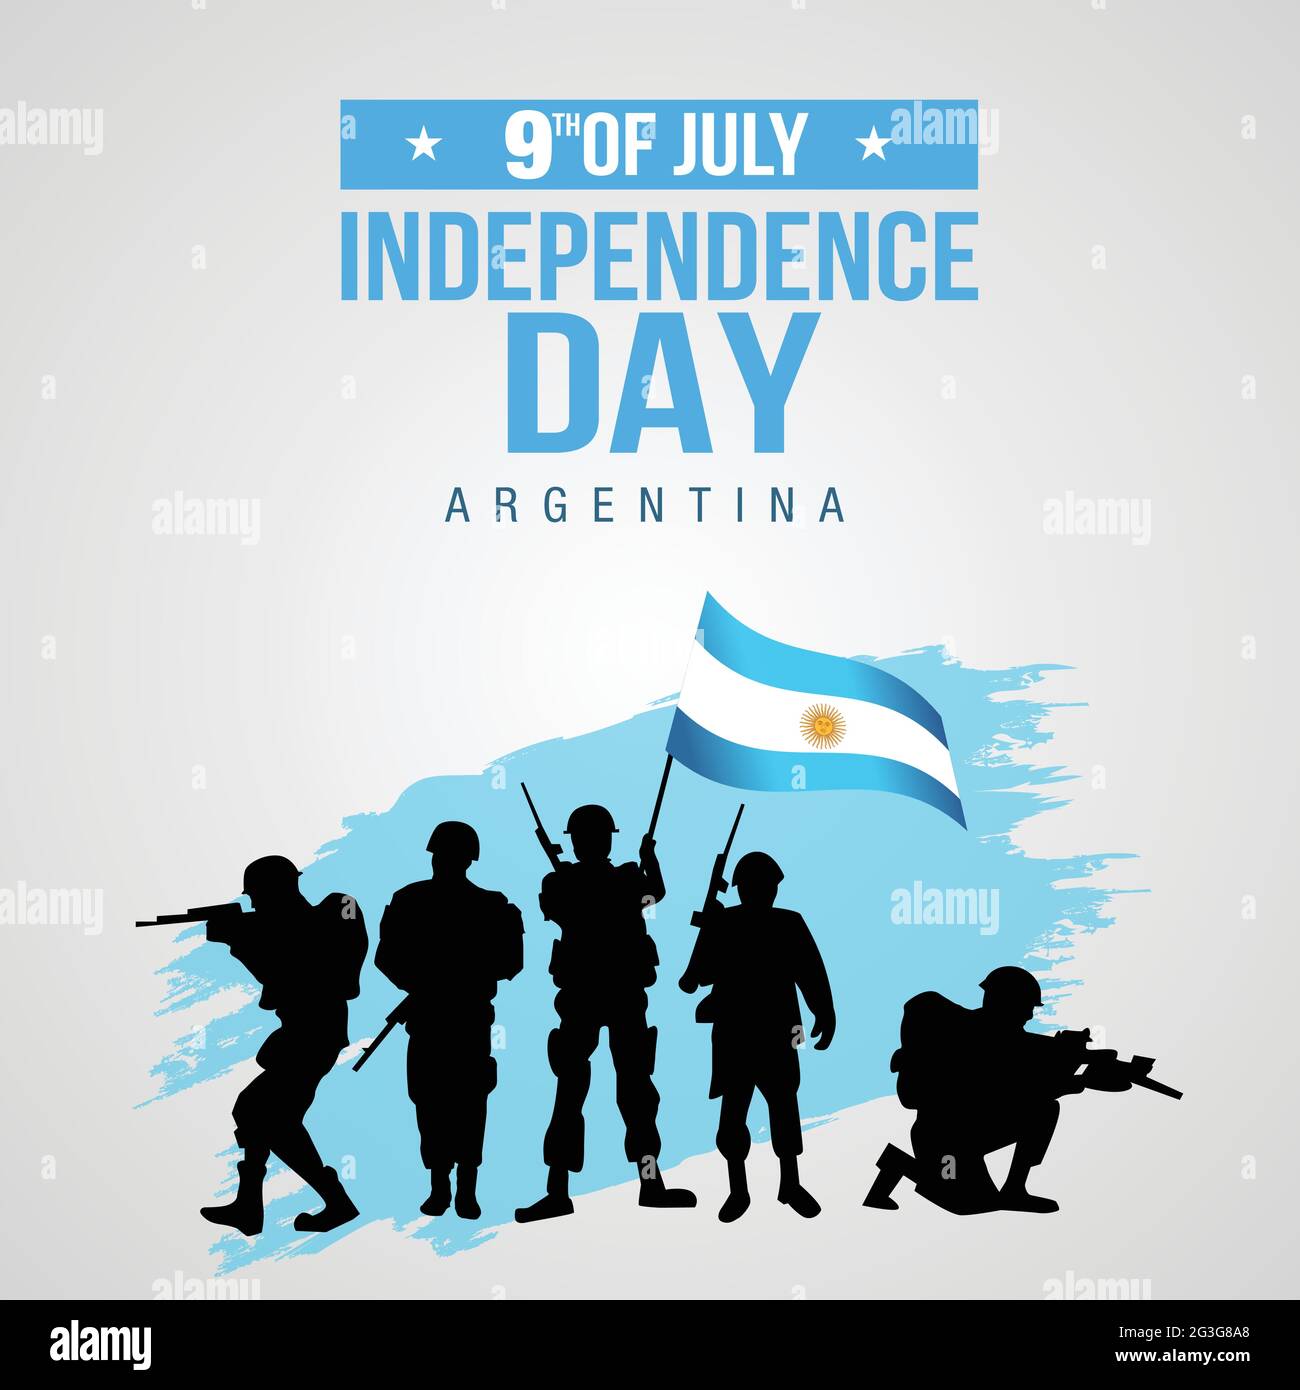 Happy independence day Argentina 9th of July Vector Template Design Illustration. silhouette soldiers raising with flag Stock Vector